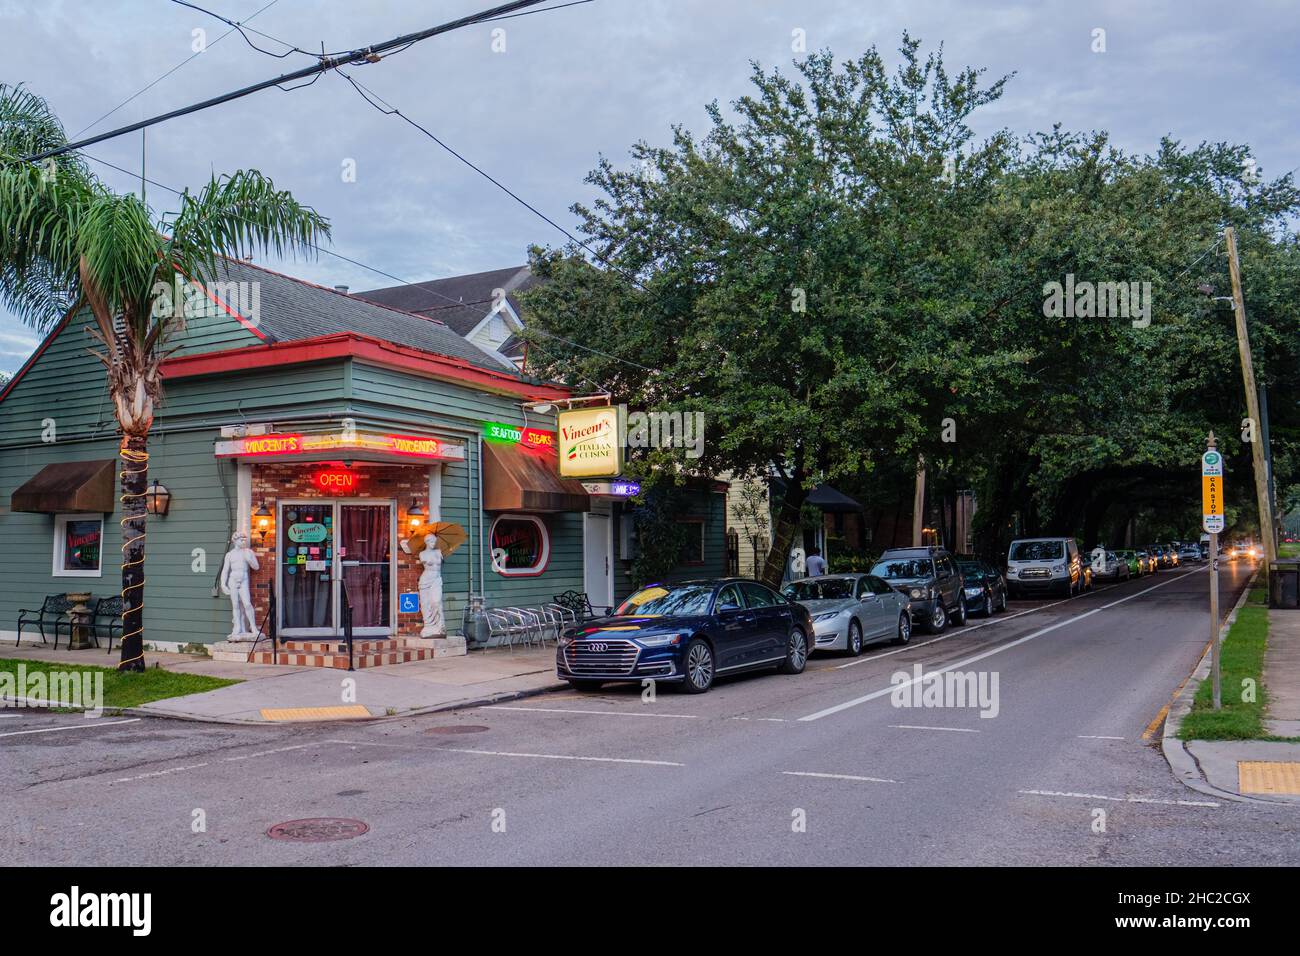 NEW ORLEANS, LA, USA - JULY 16, 2020: Vincent's Italian Cuisine on St. Charles Avenue at dusk Stock Photo